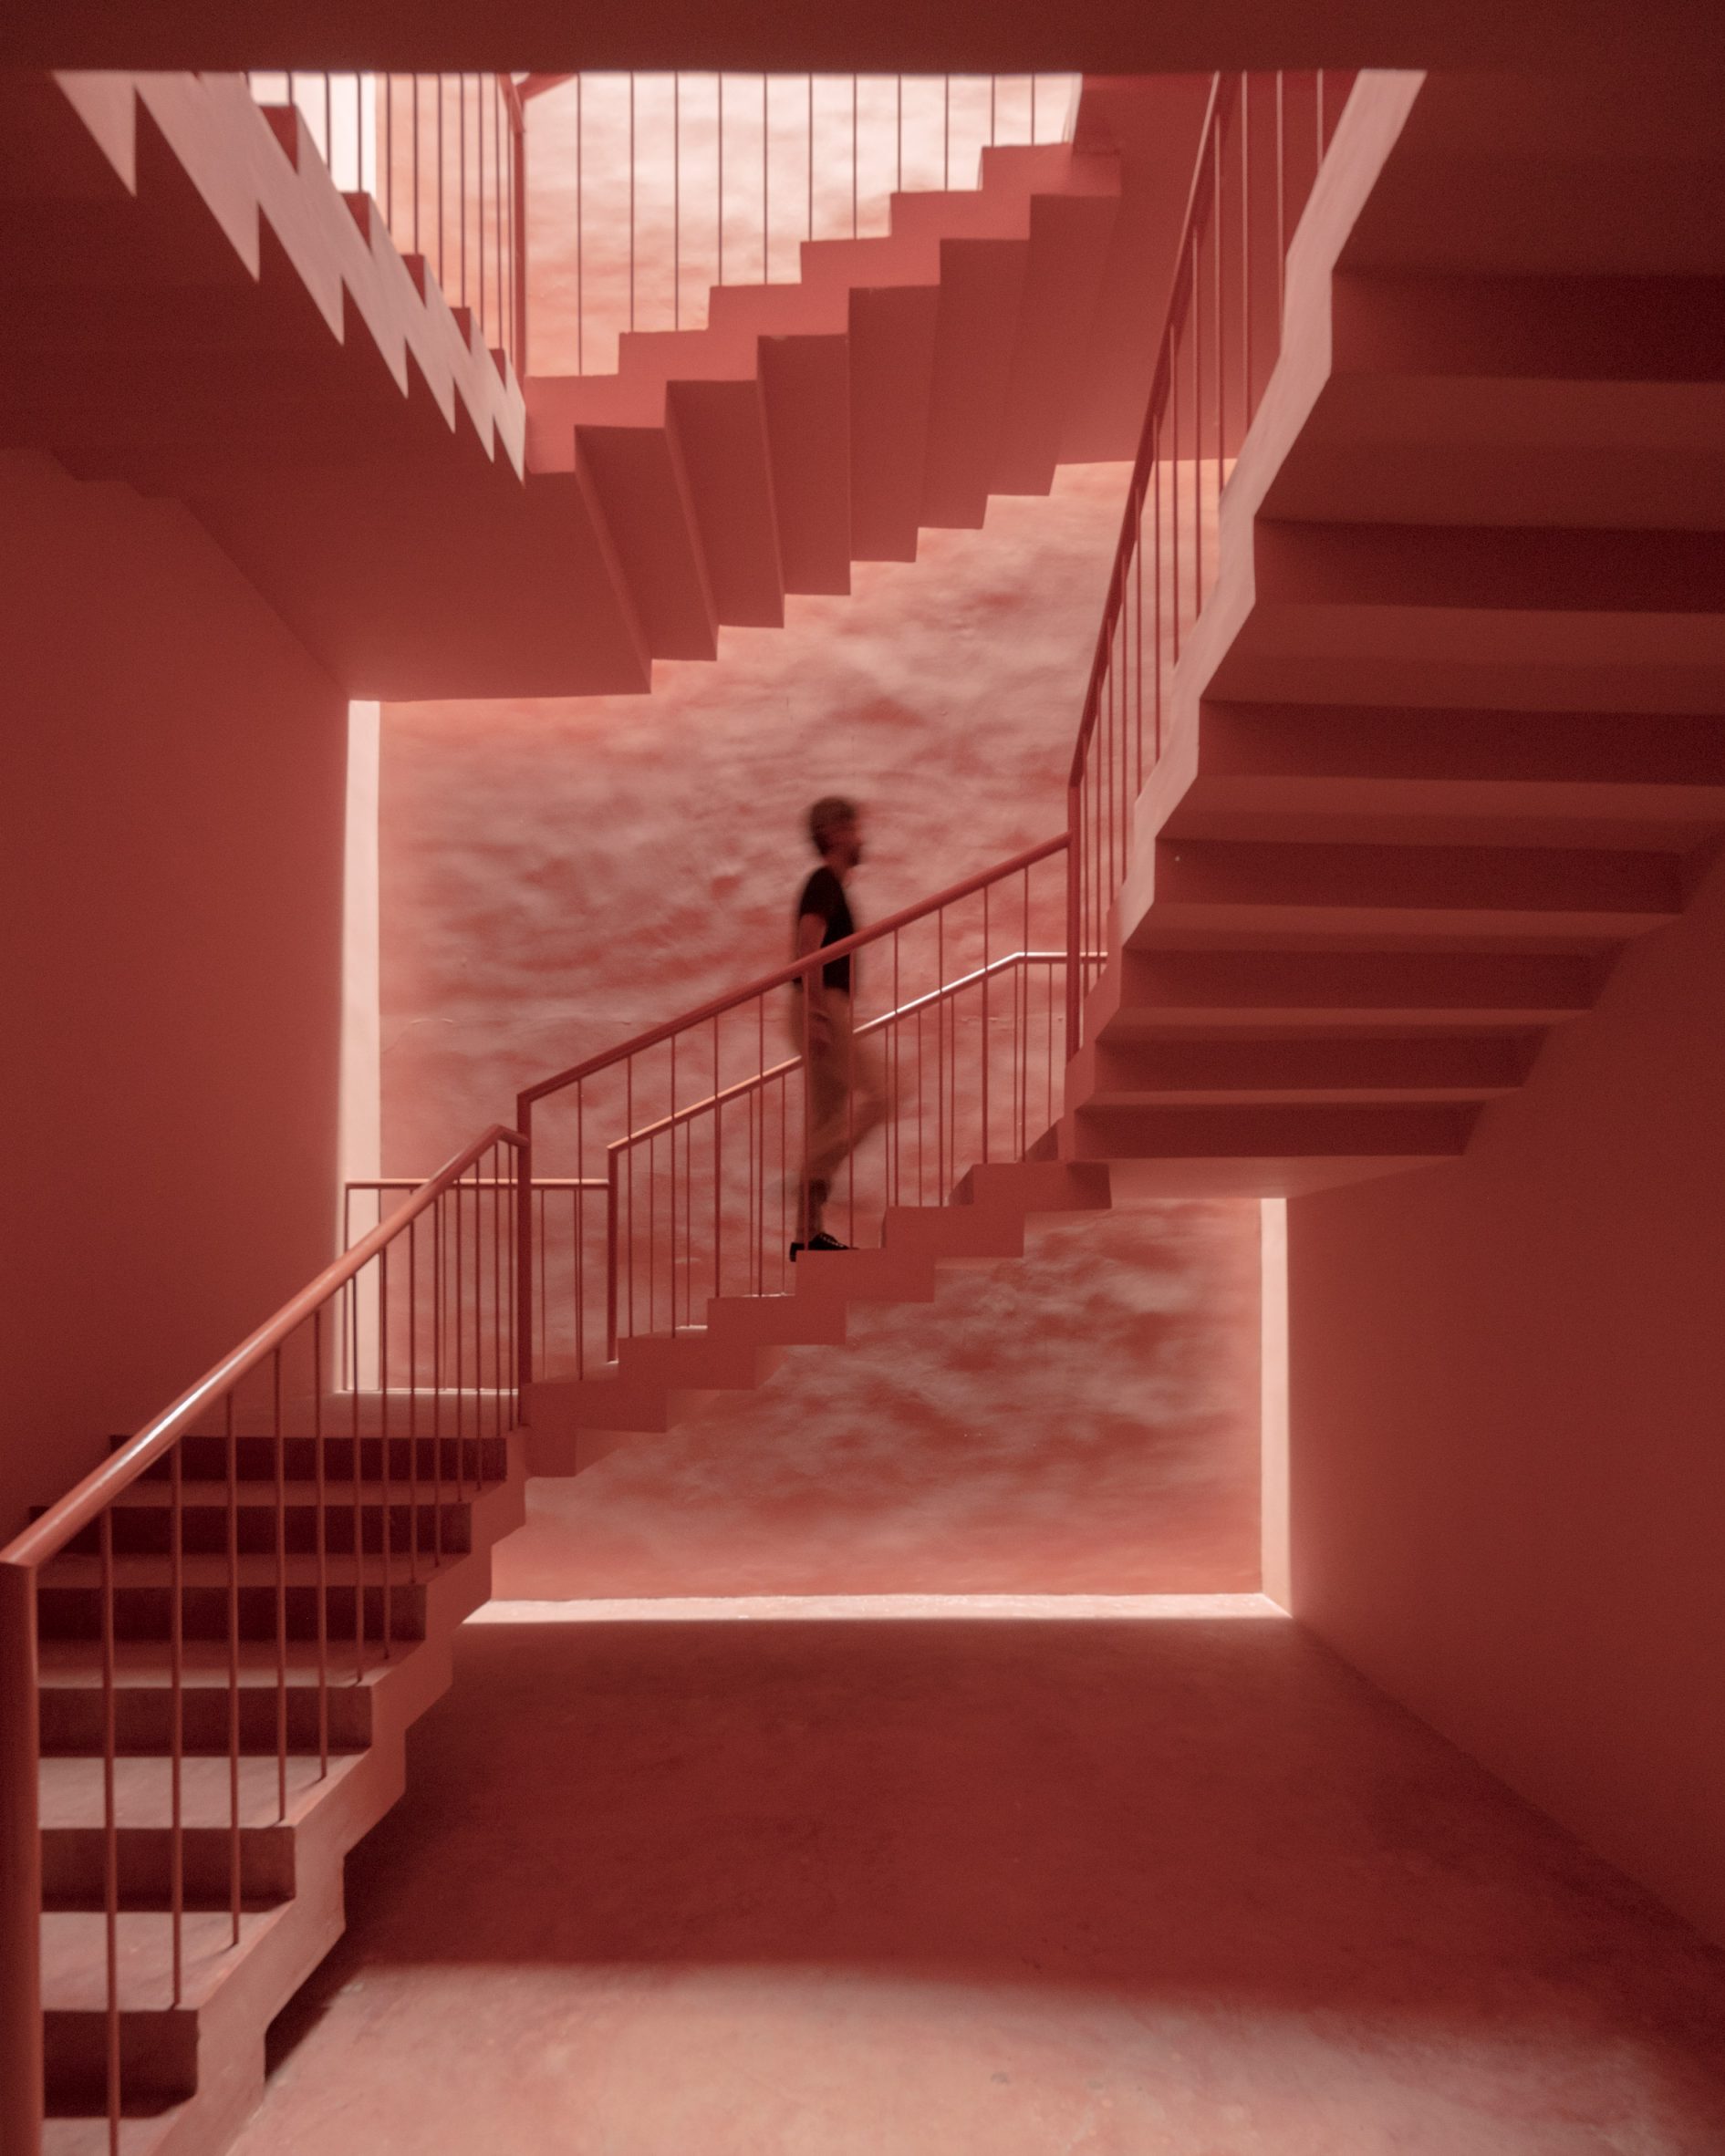 Interior stairwell at the Dr. Vishnuvardhan Memorial Complex in India